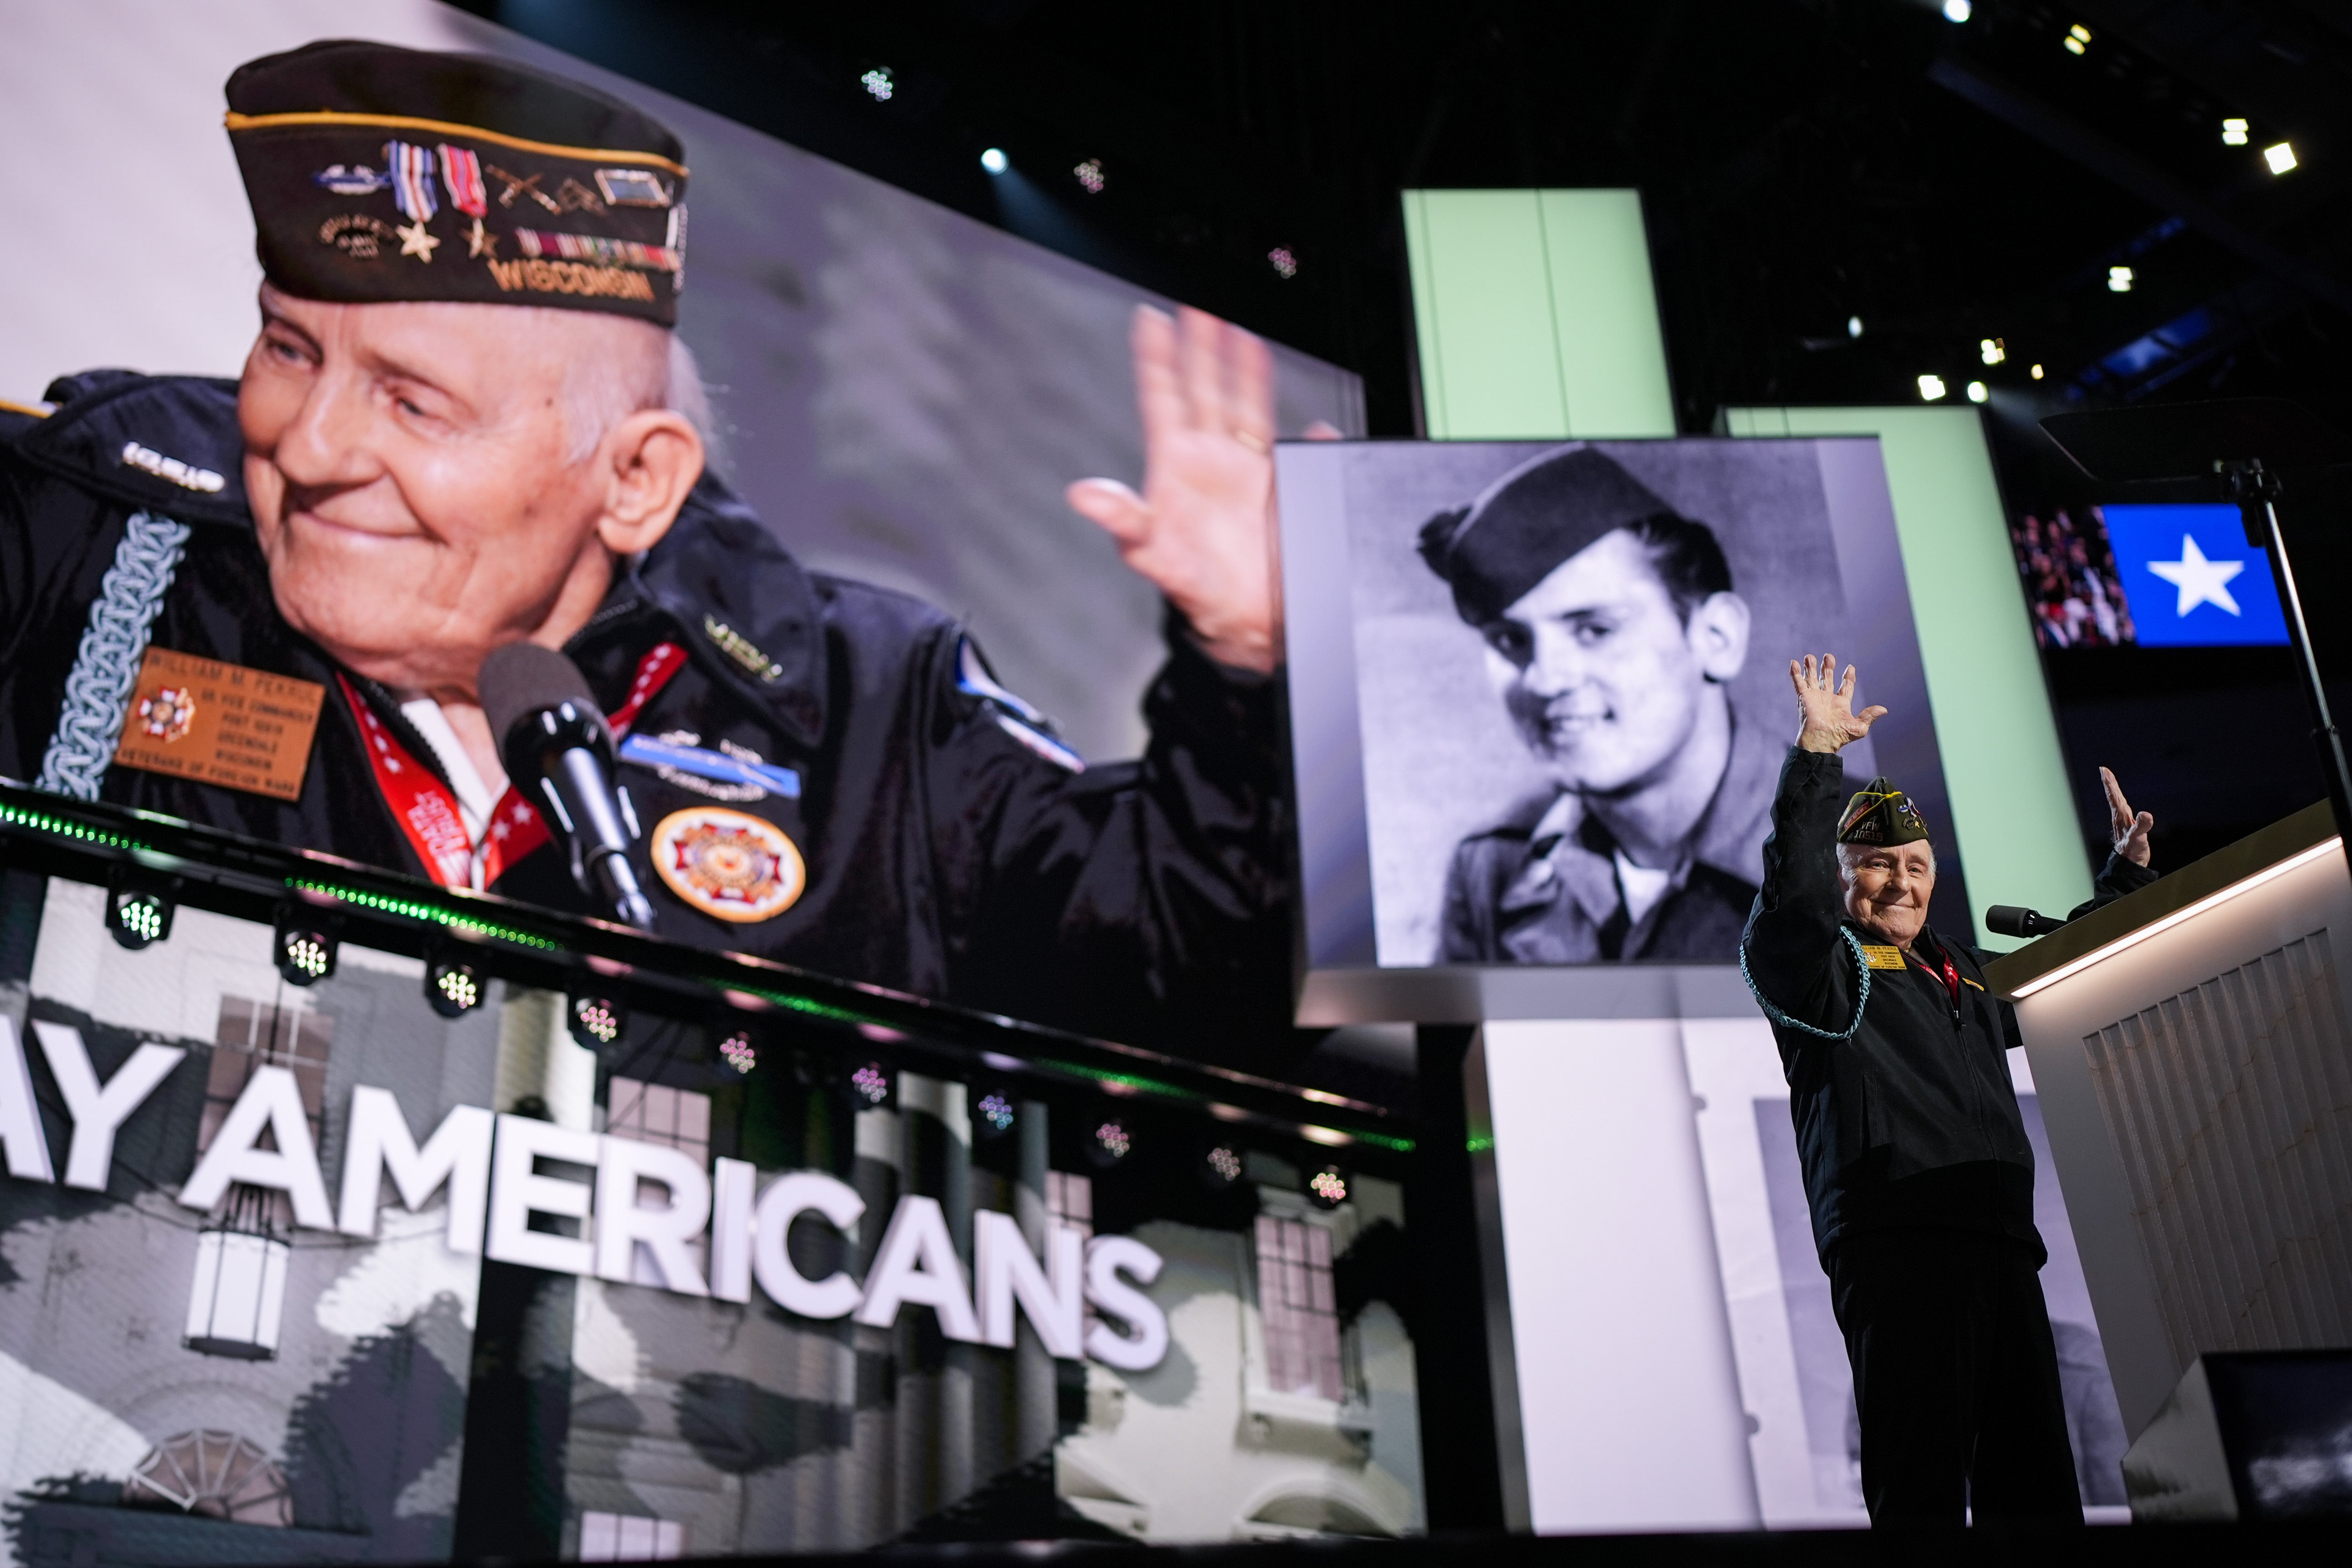 The veteran interrupted his speech to reward the RNC crowd with chants of “USA!”